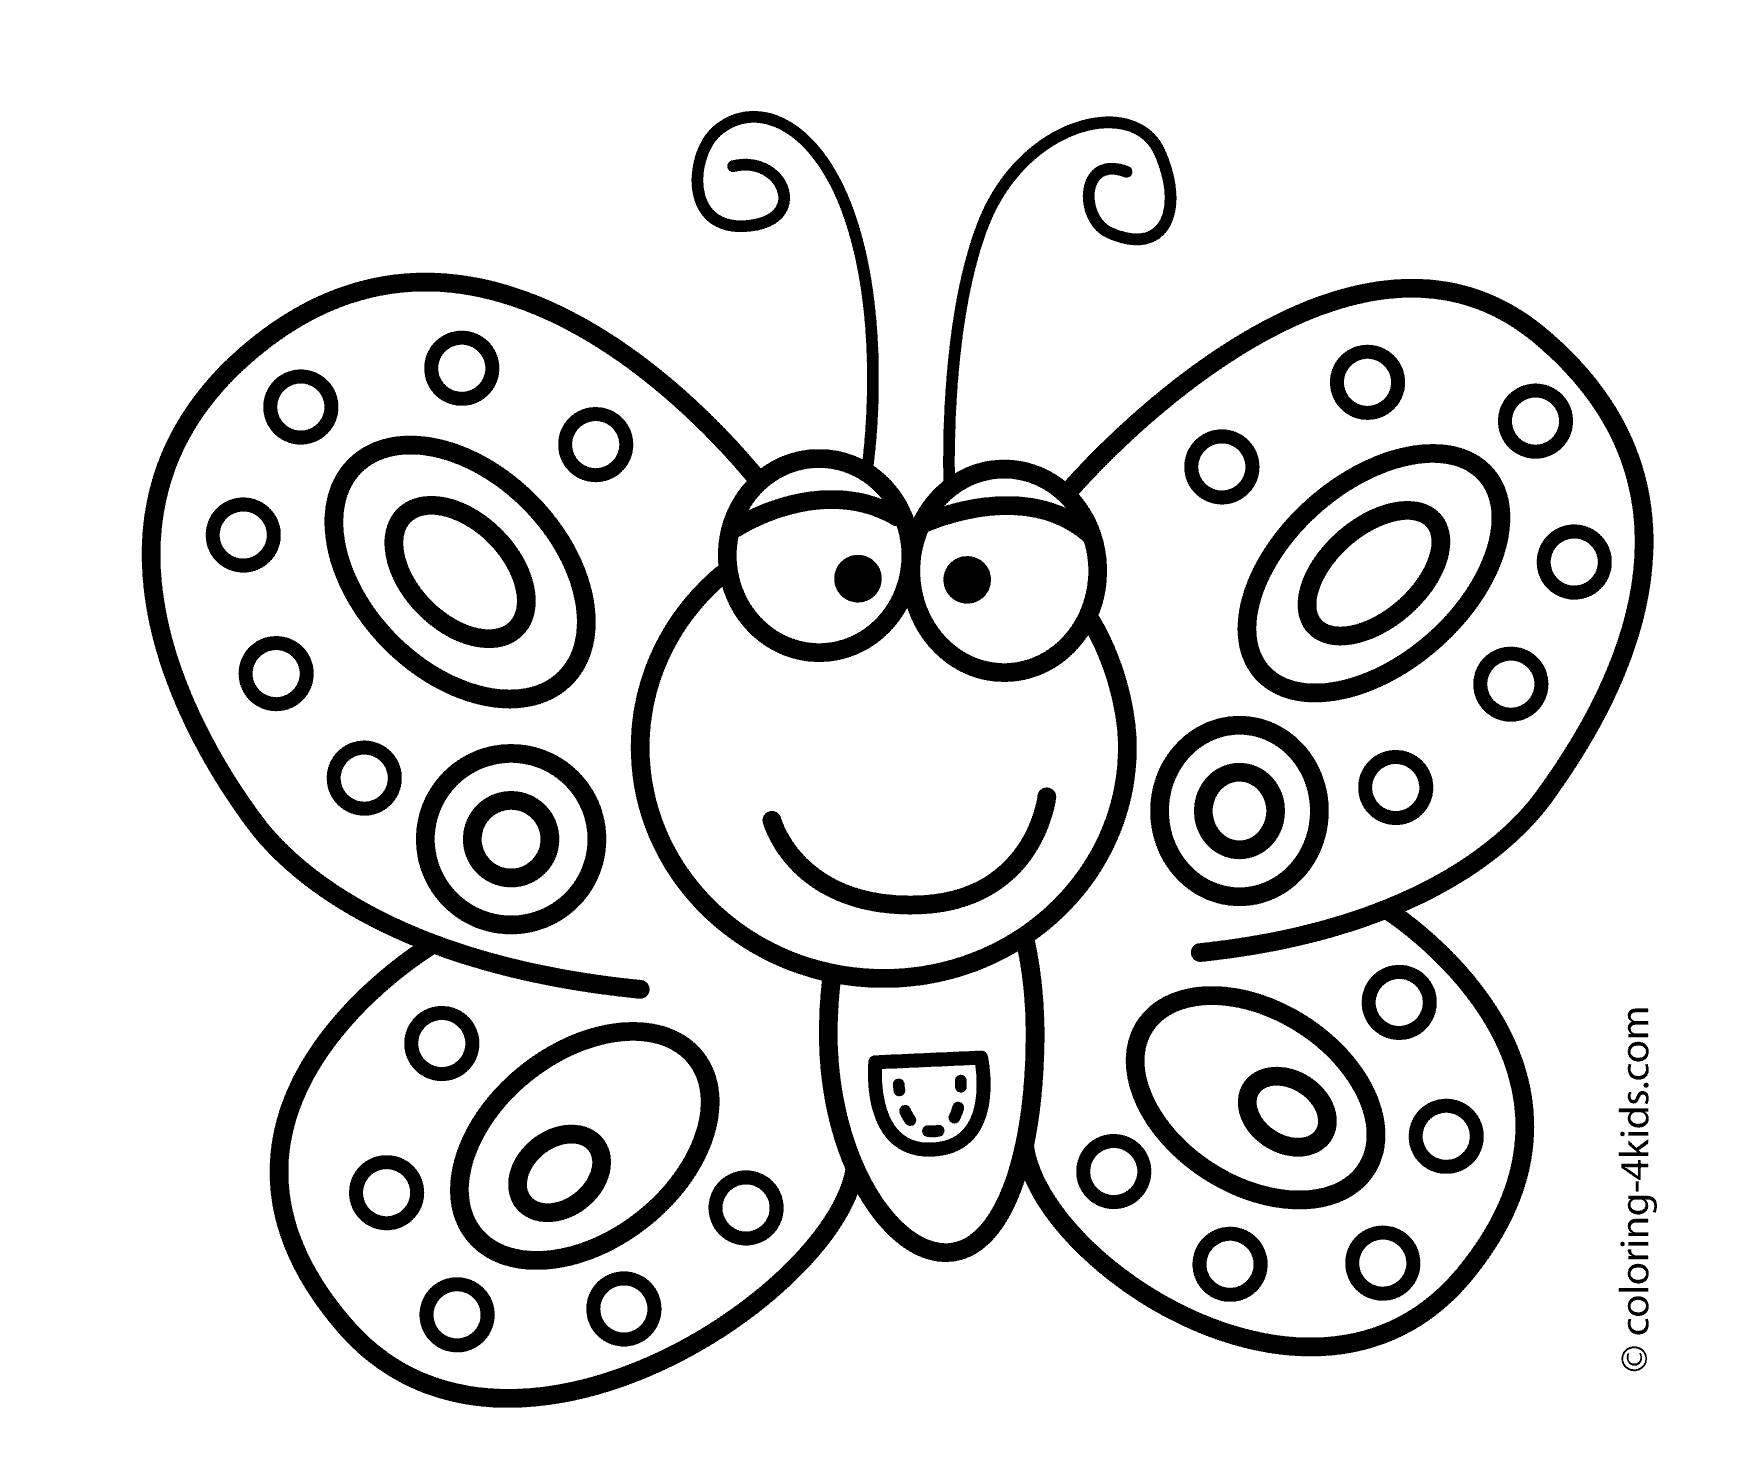 pic-of-butterfly-simple-in-black-n-white-for-colouring-for-kindergarten